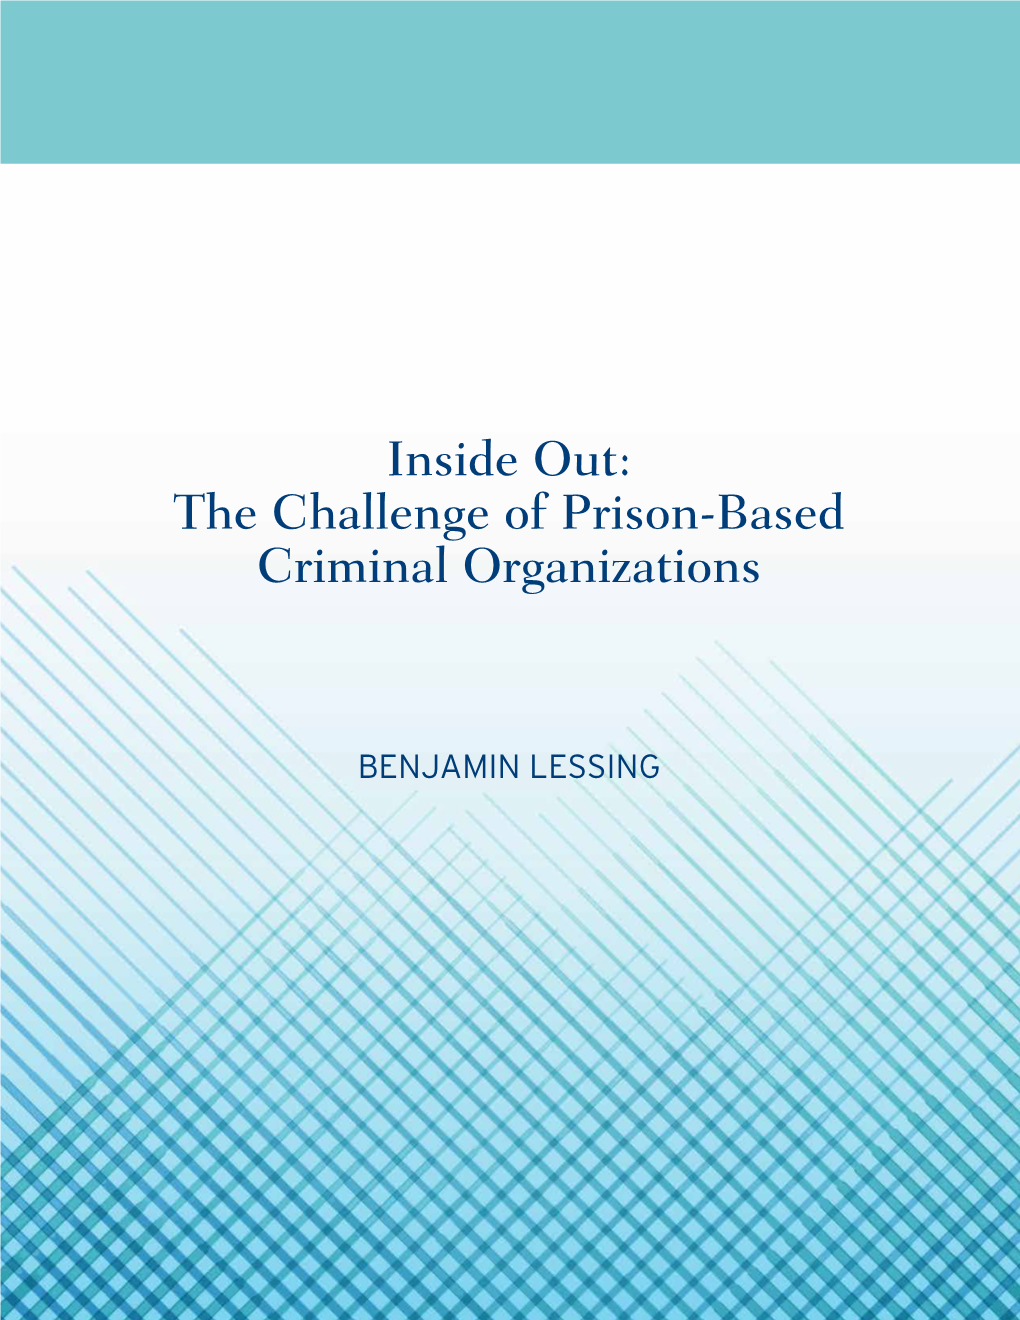 Inside Out: the Challenge of Prison-Based Criminal Organizations